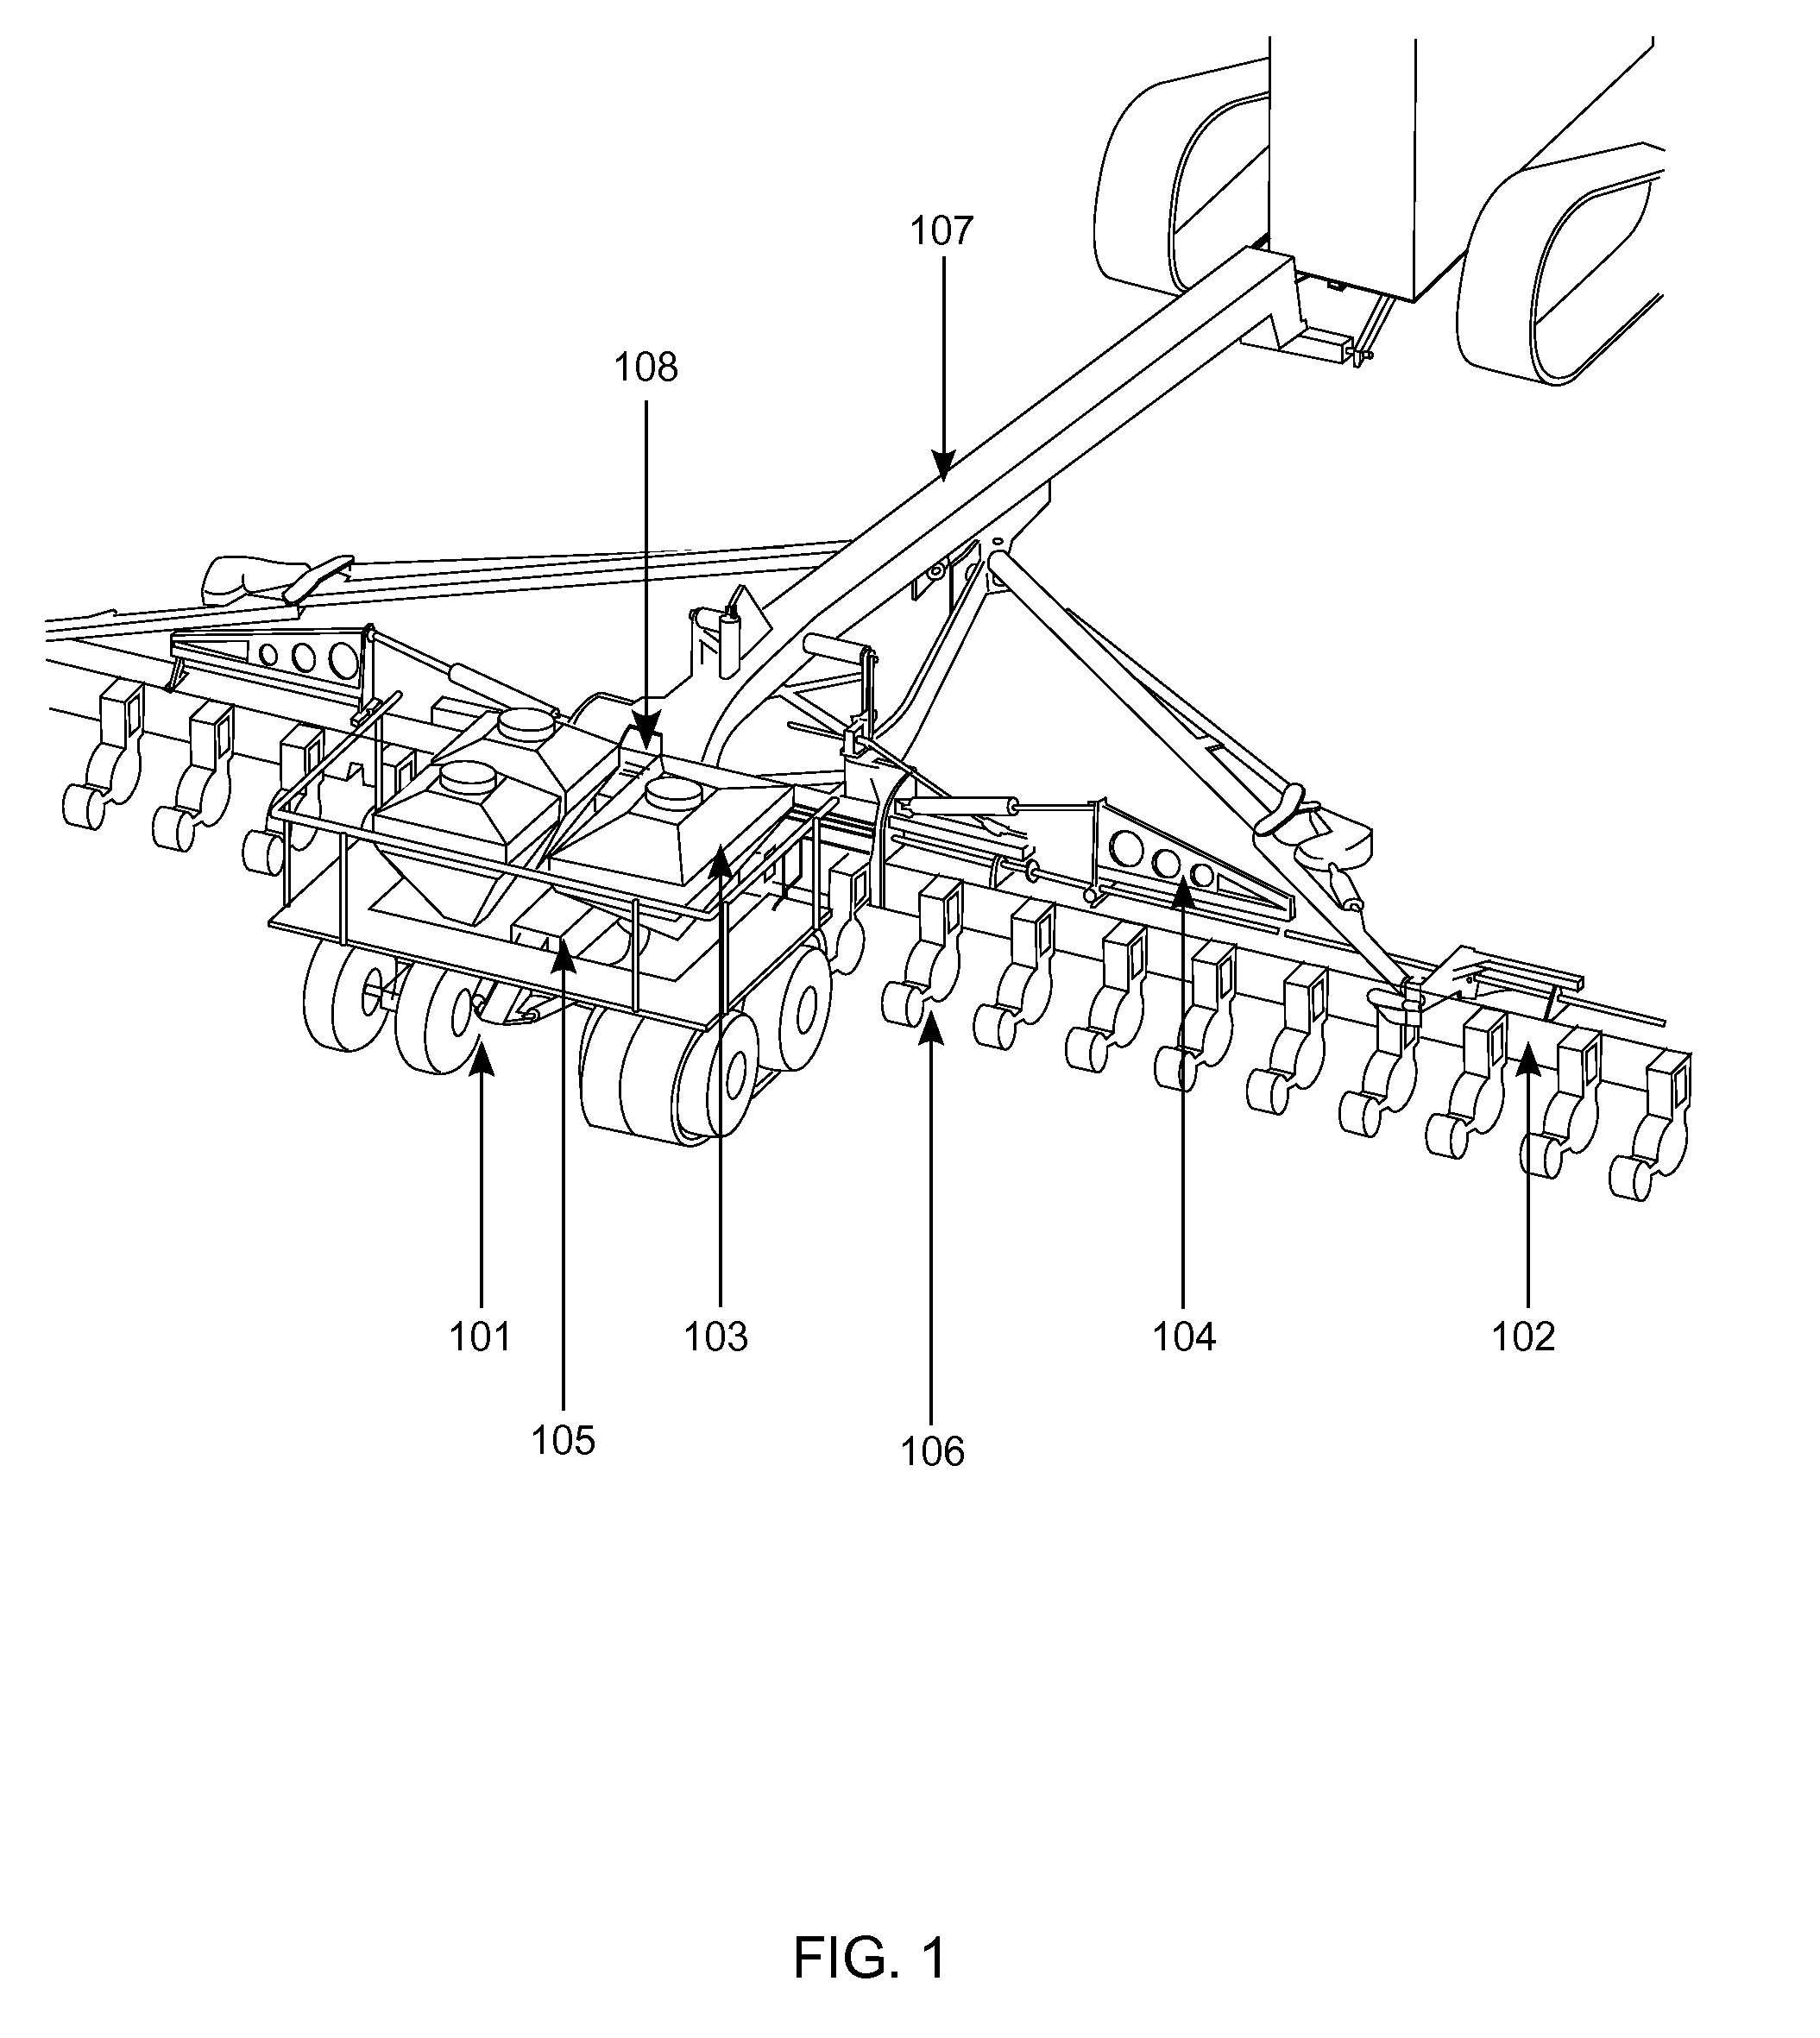 Row-producing system for agricultural crops